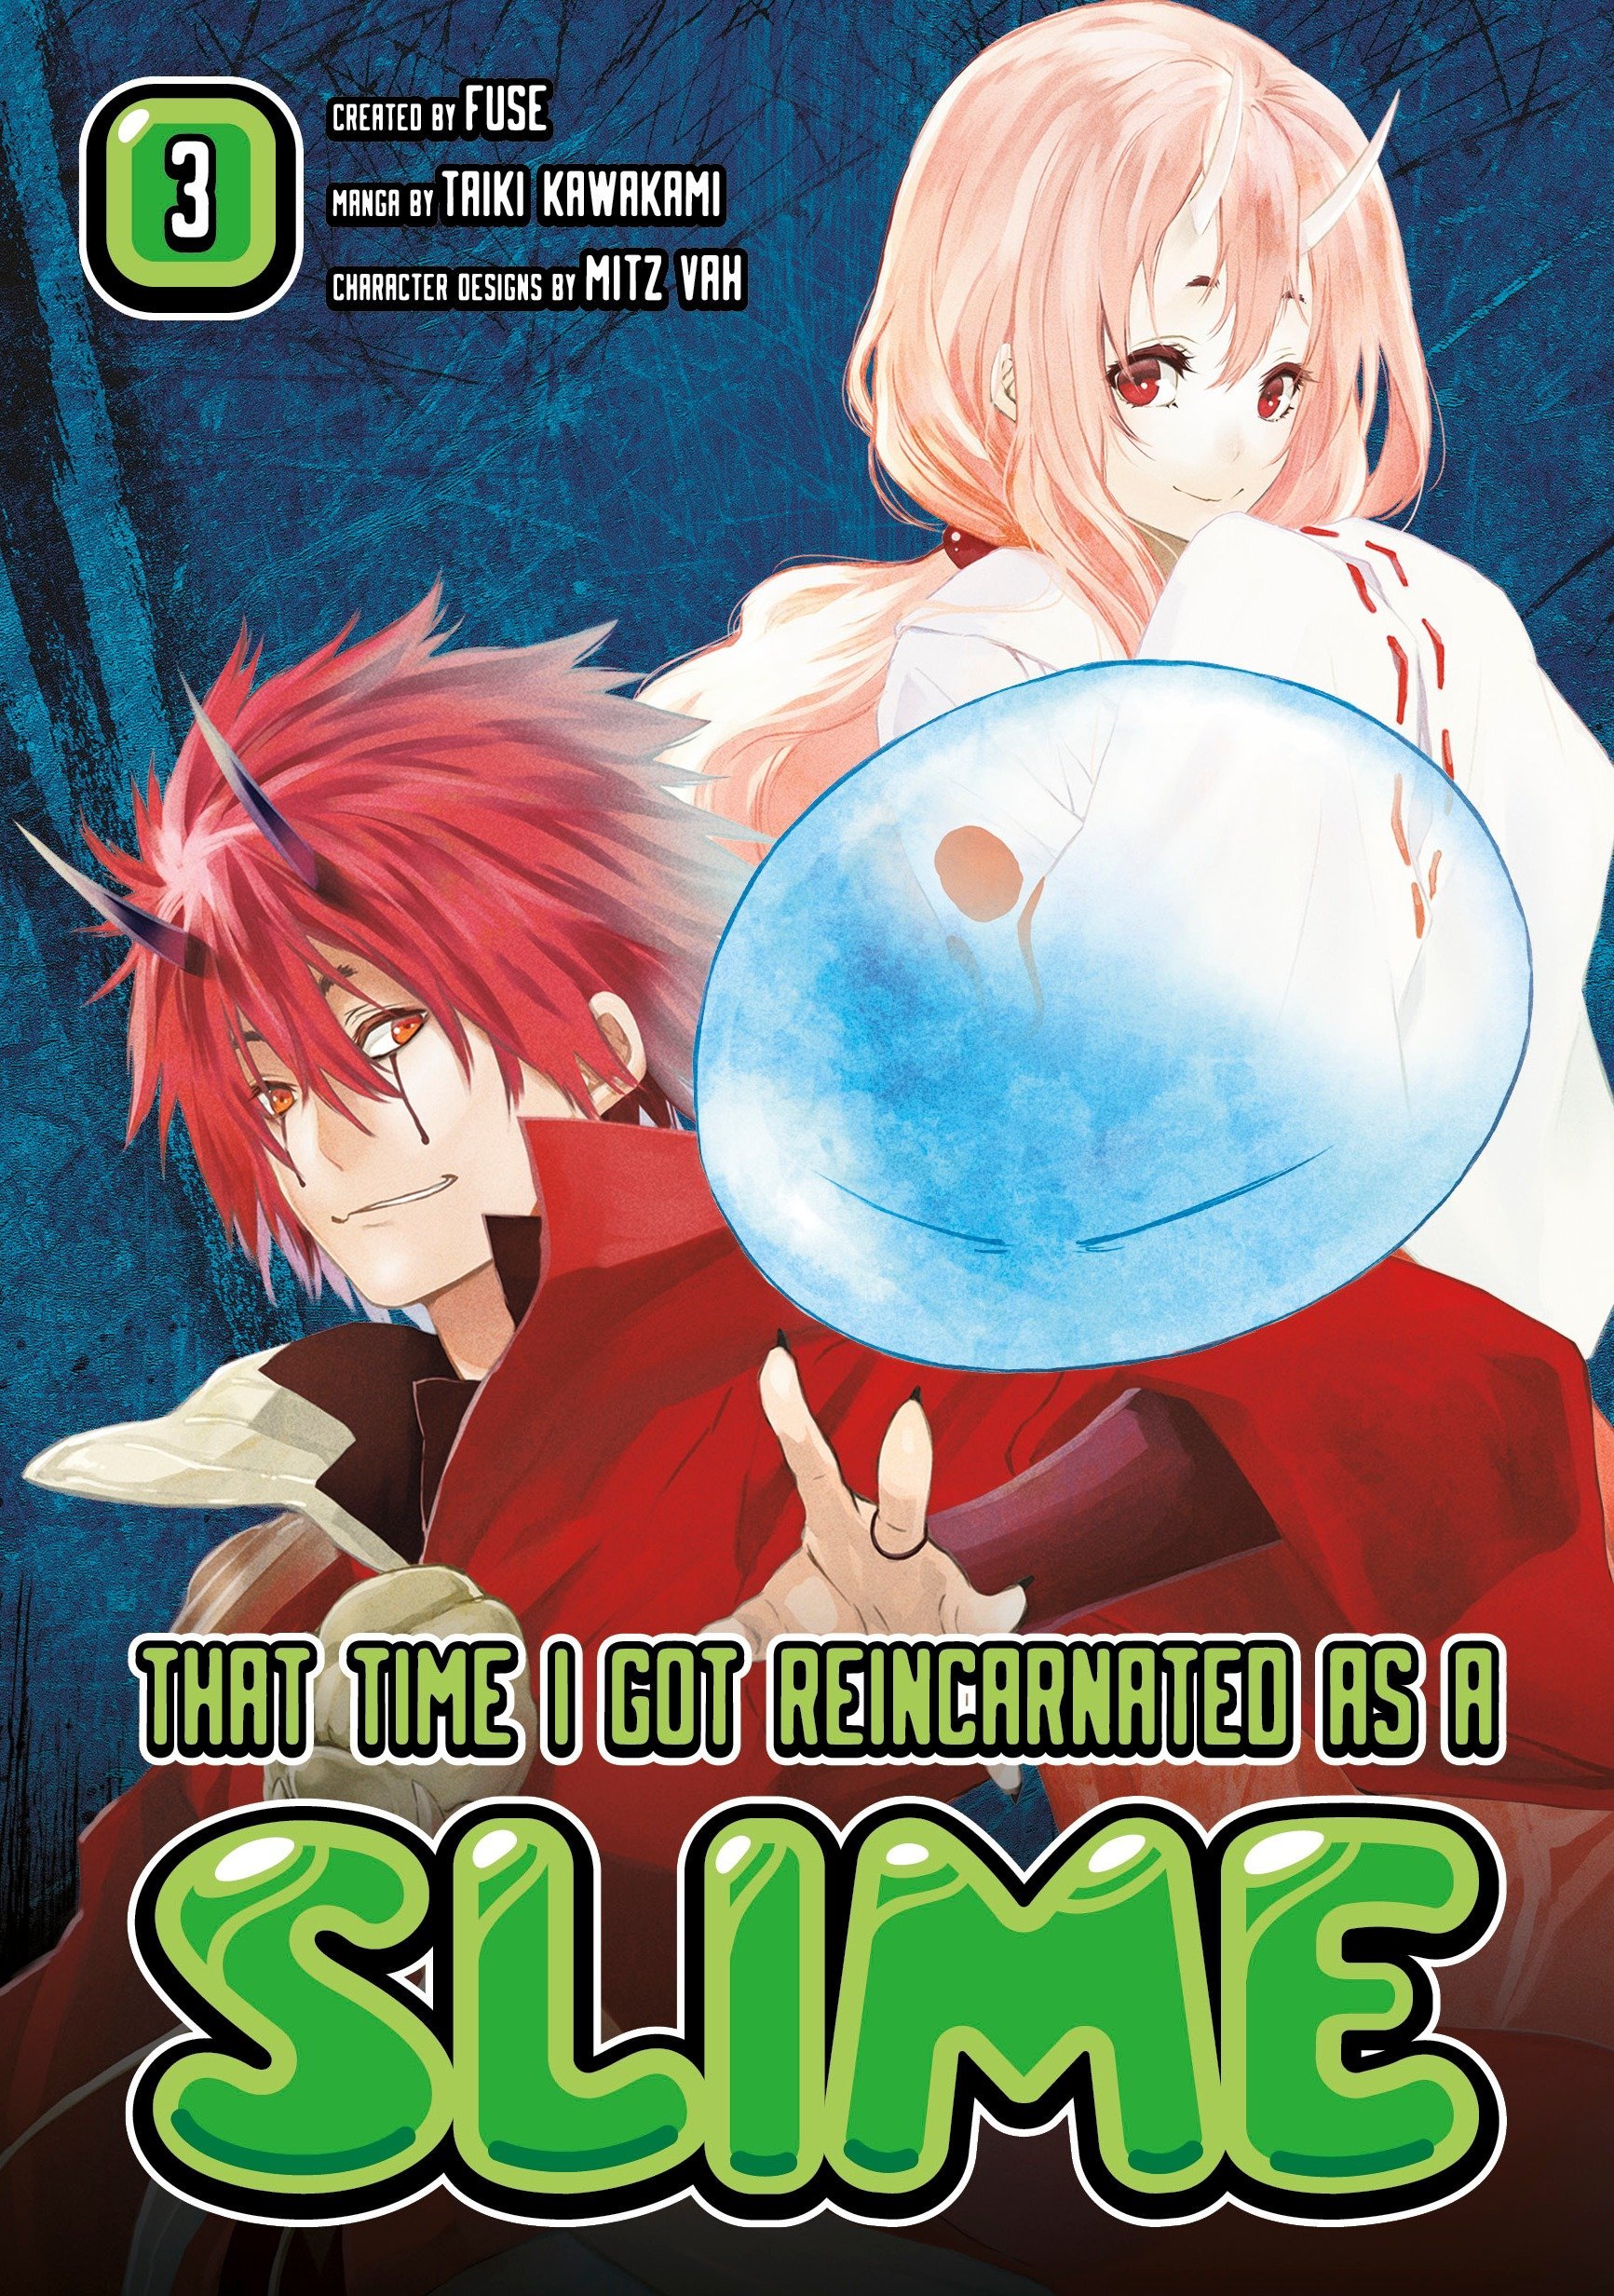 That Time I Got Reincarnated As A Slime vol 3